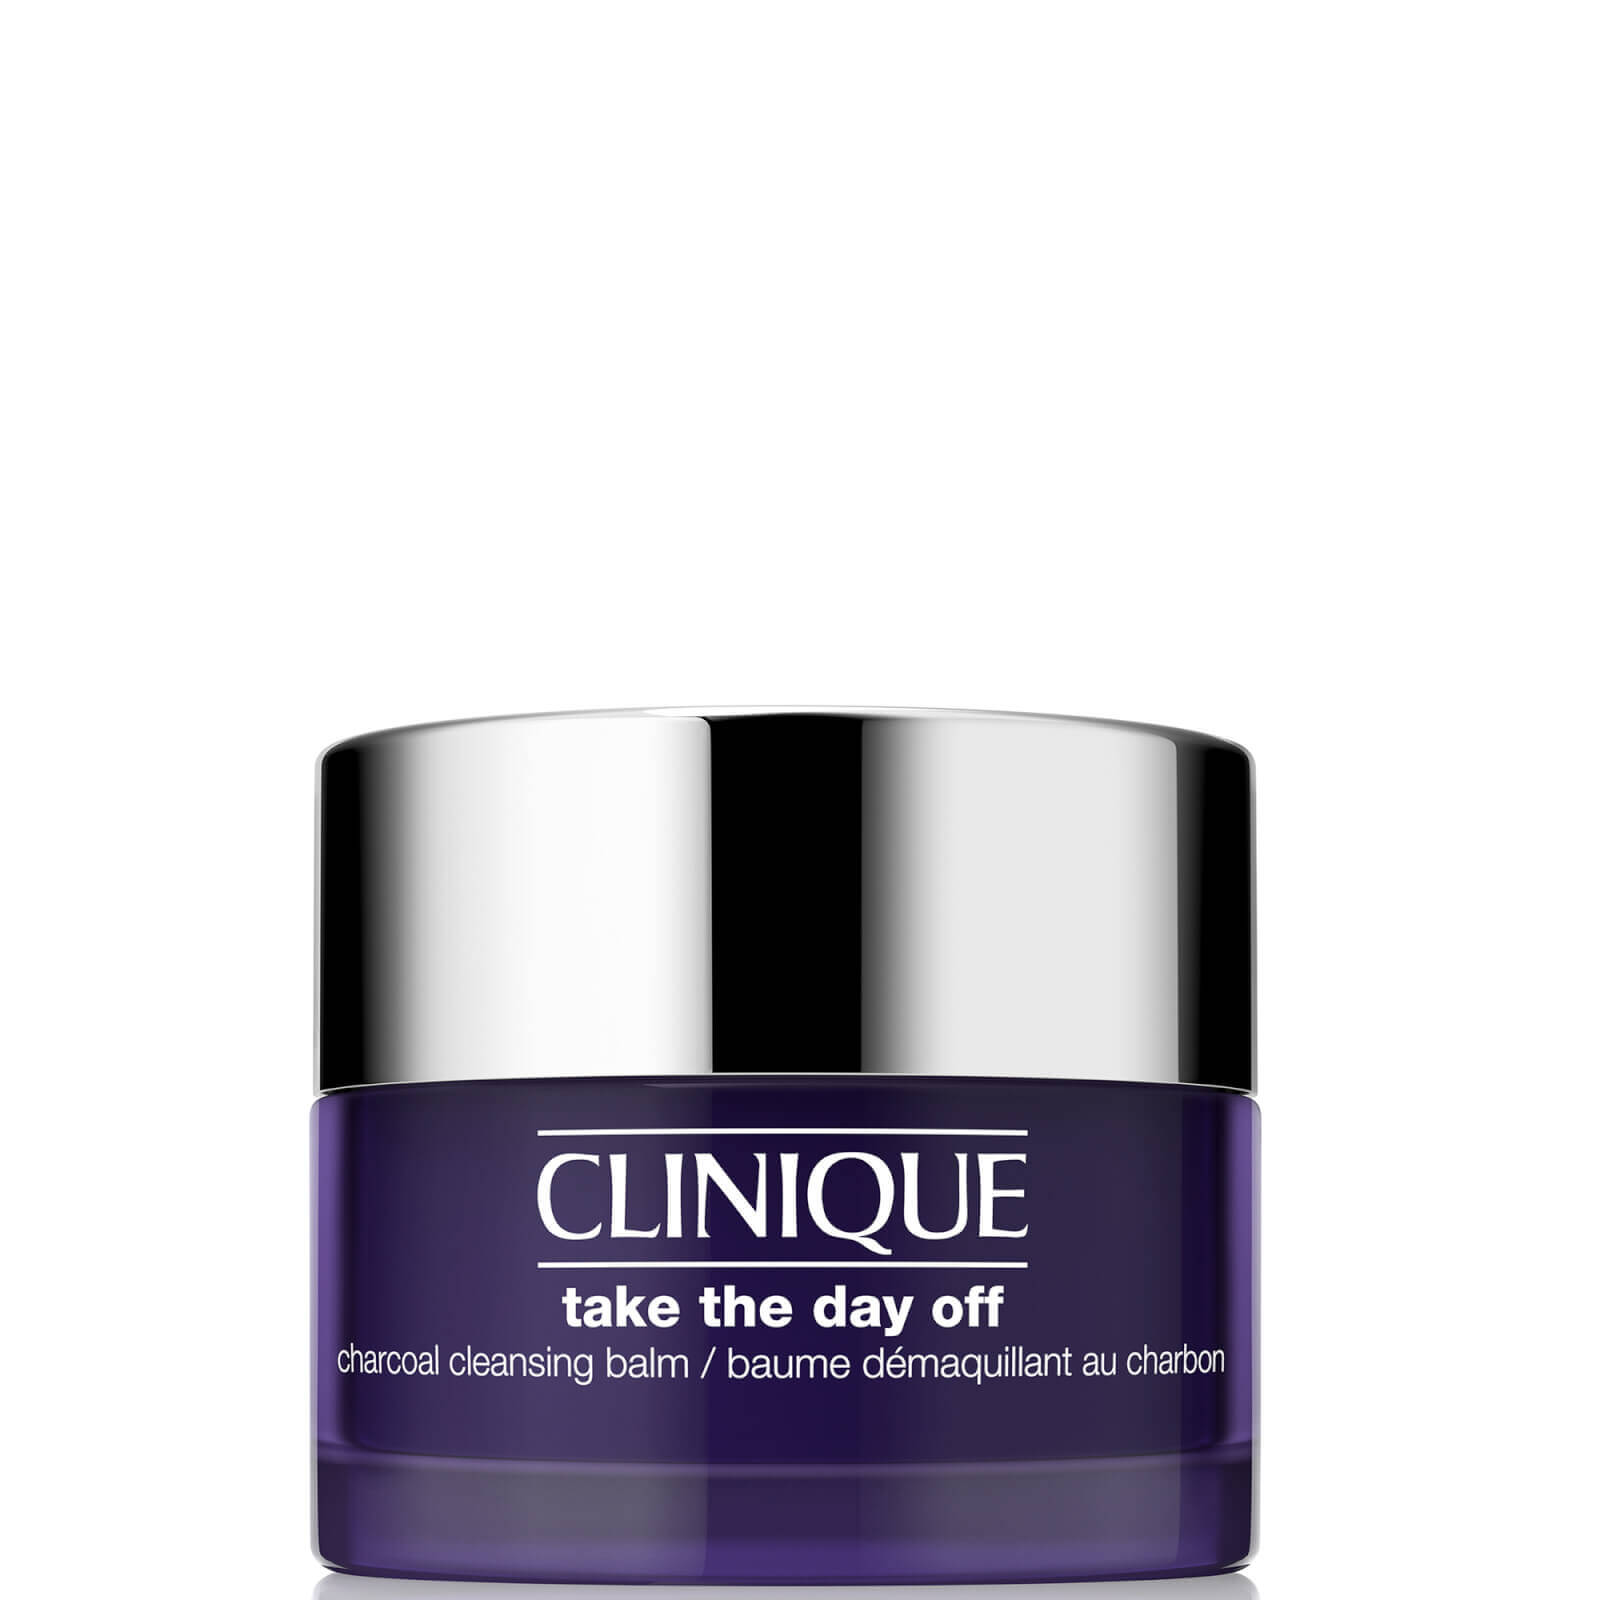 Photos - Facial / Body Cleansing Product Clinique Take The Day Off Charcoal Balm  - 30ml V735010000 (Various Sizes)